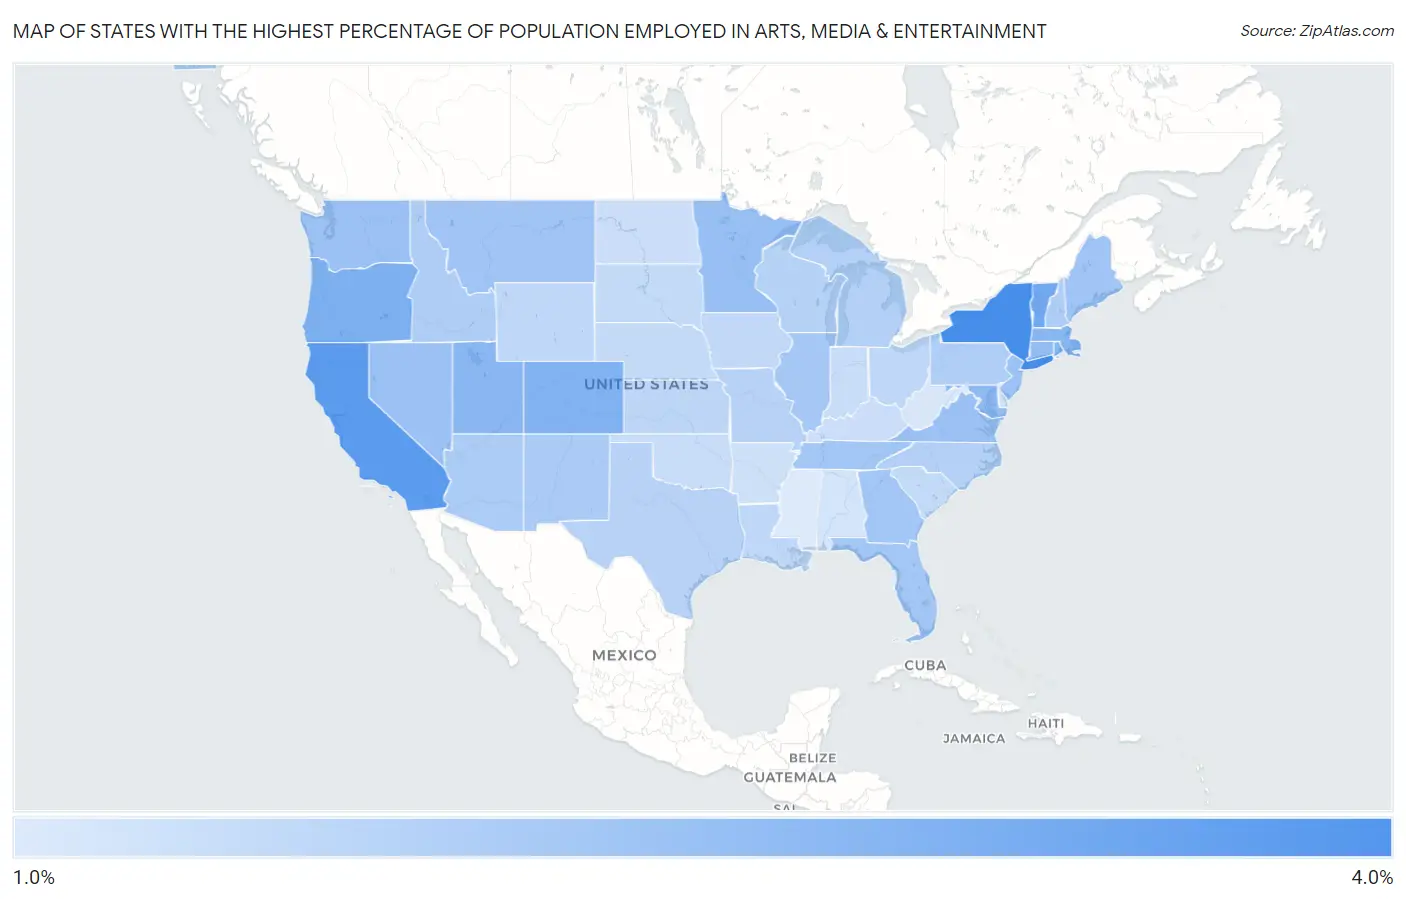 States with the Highest Percentage of Population Employed in Arts, Media & Entertainment in the United States Map